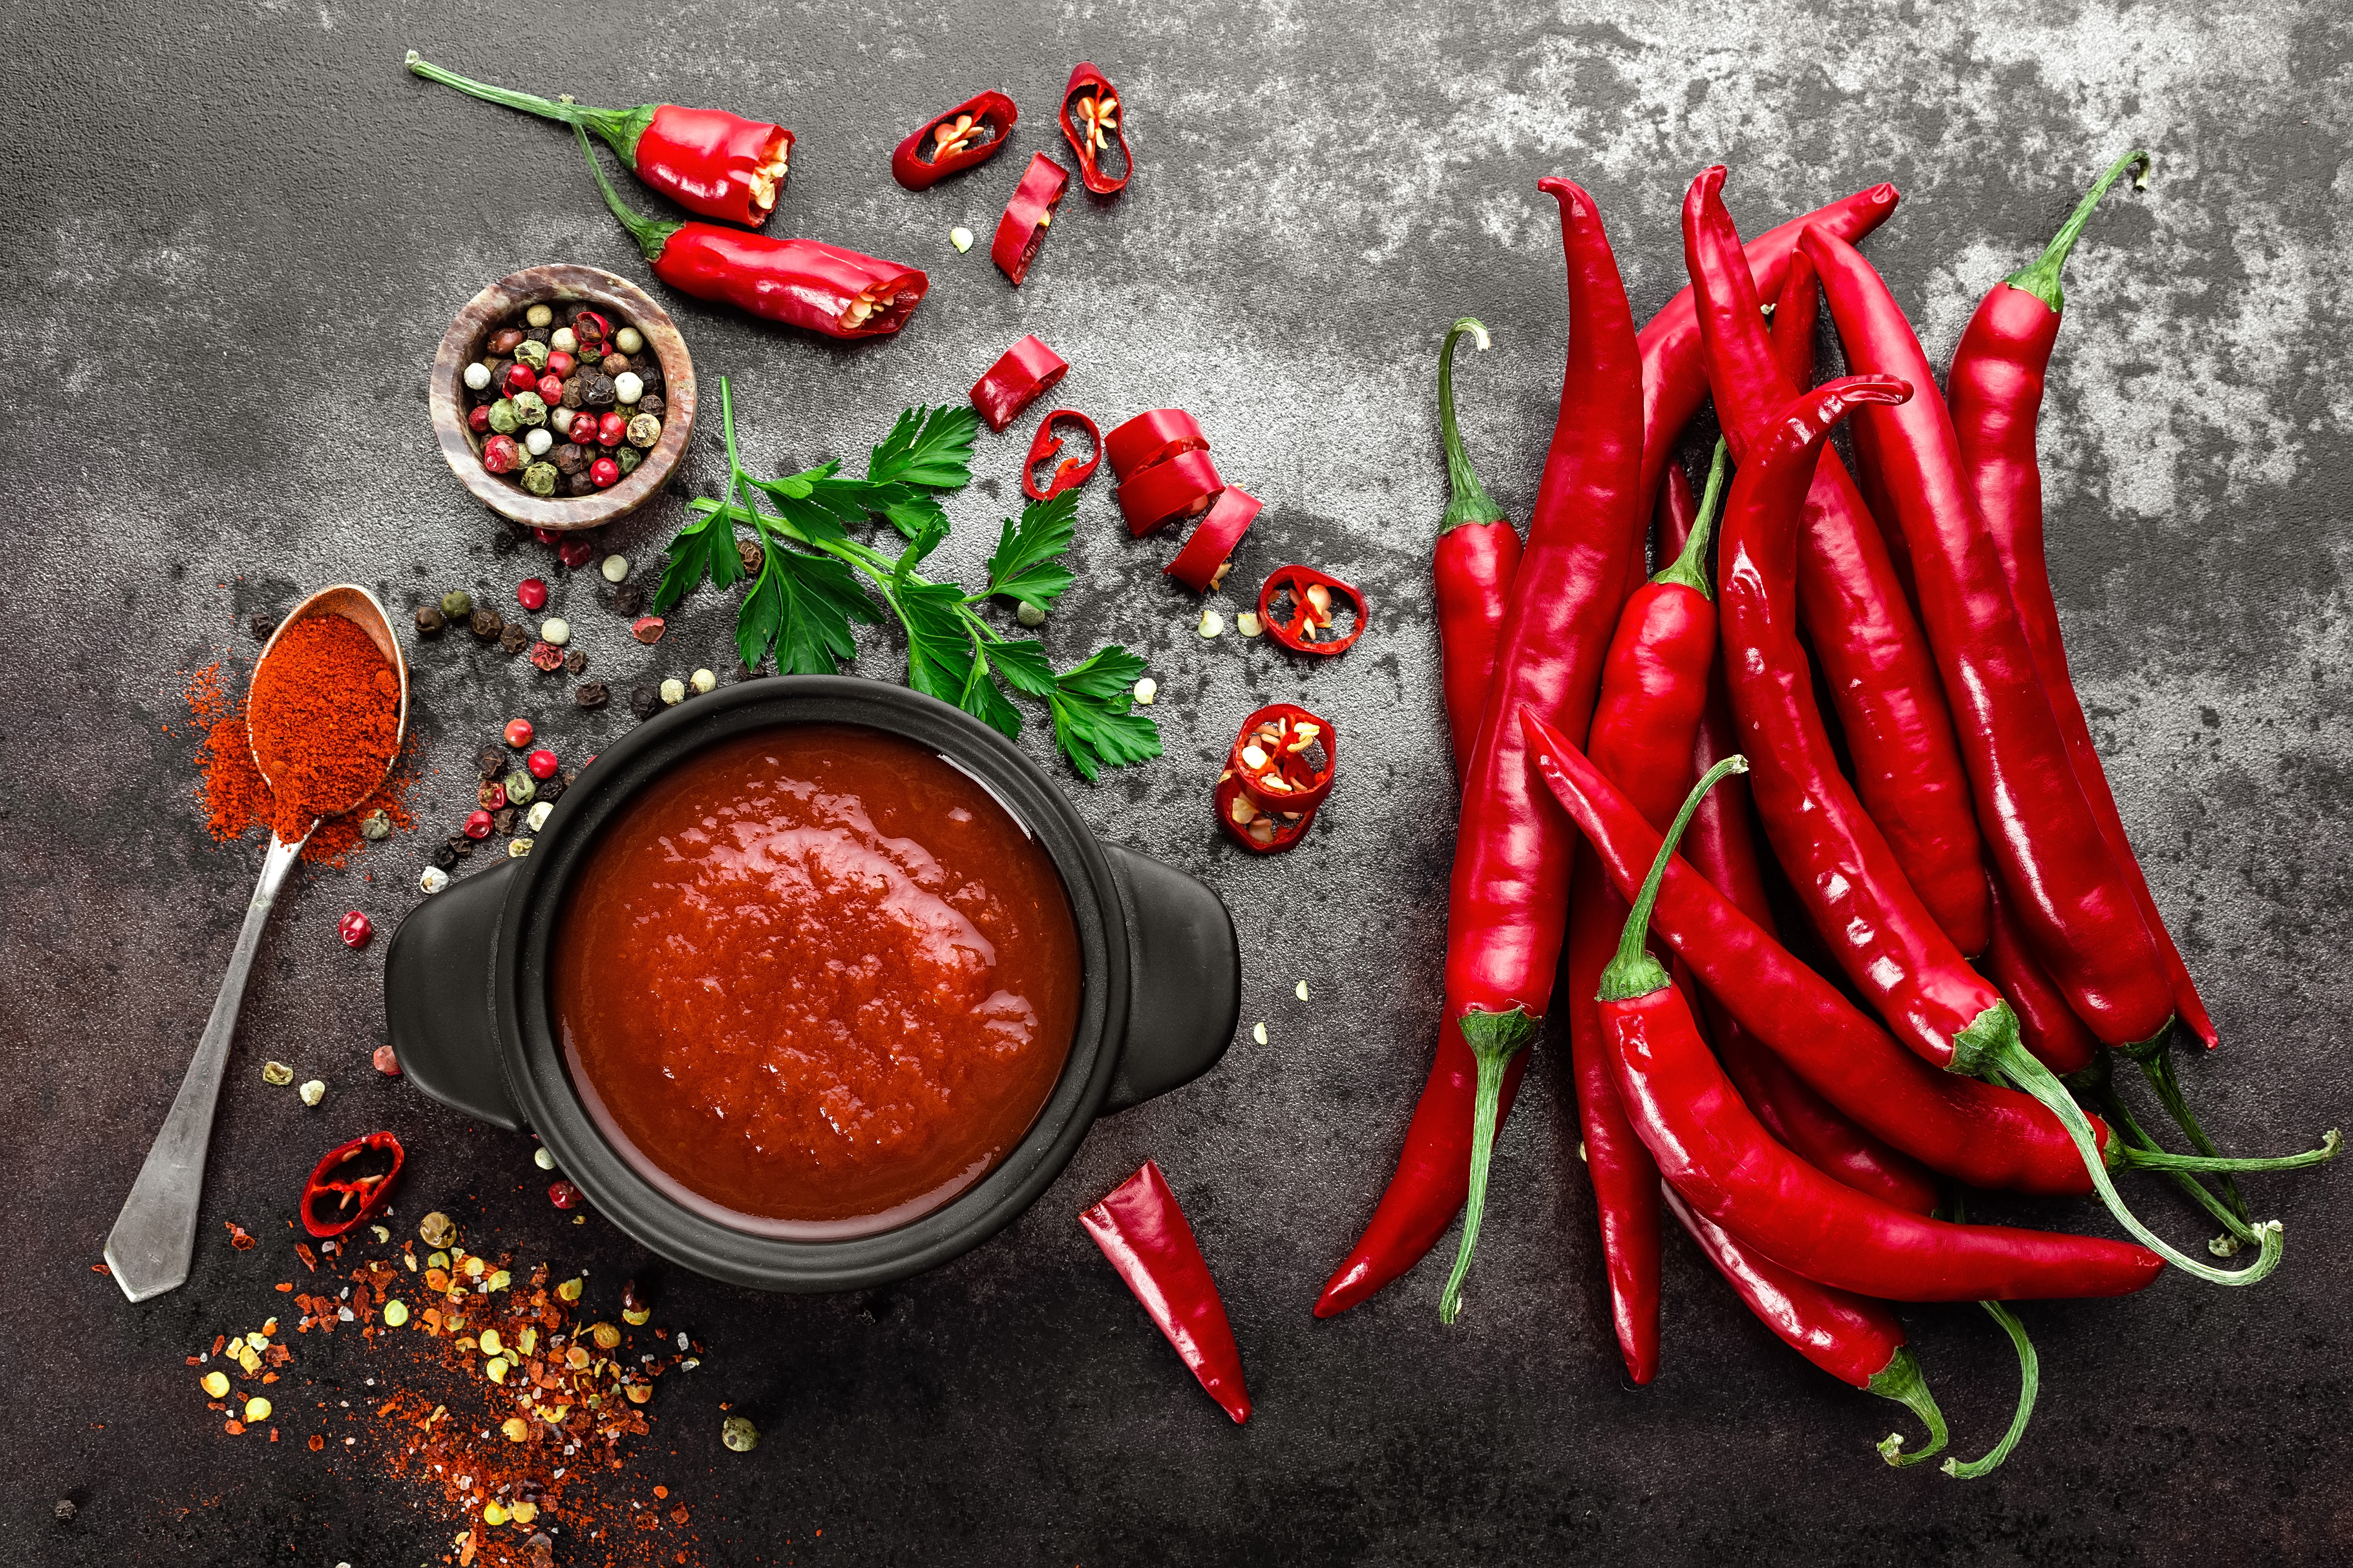 The Science Behind: Spicy Foods